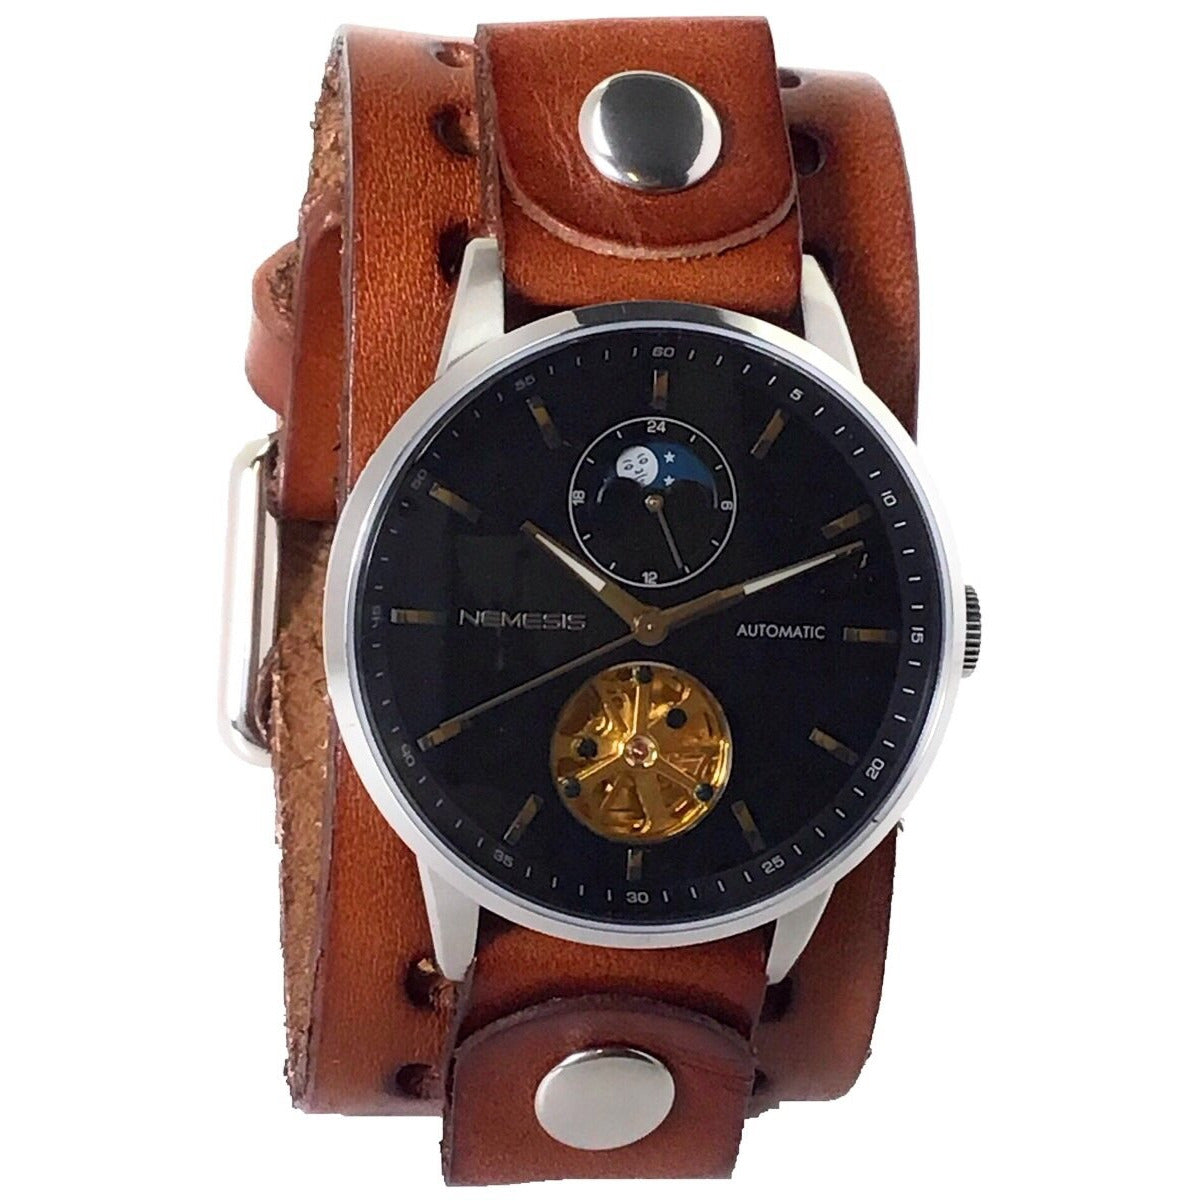 Tourbillon Day/Night Black and Silver Hand Watch with Perforated Khaki Leather Cuff